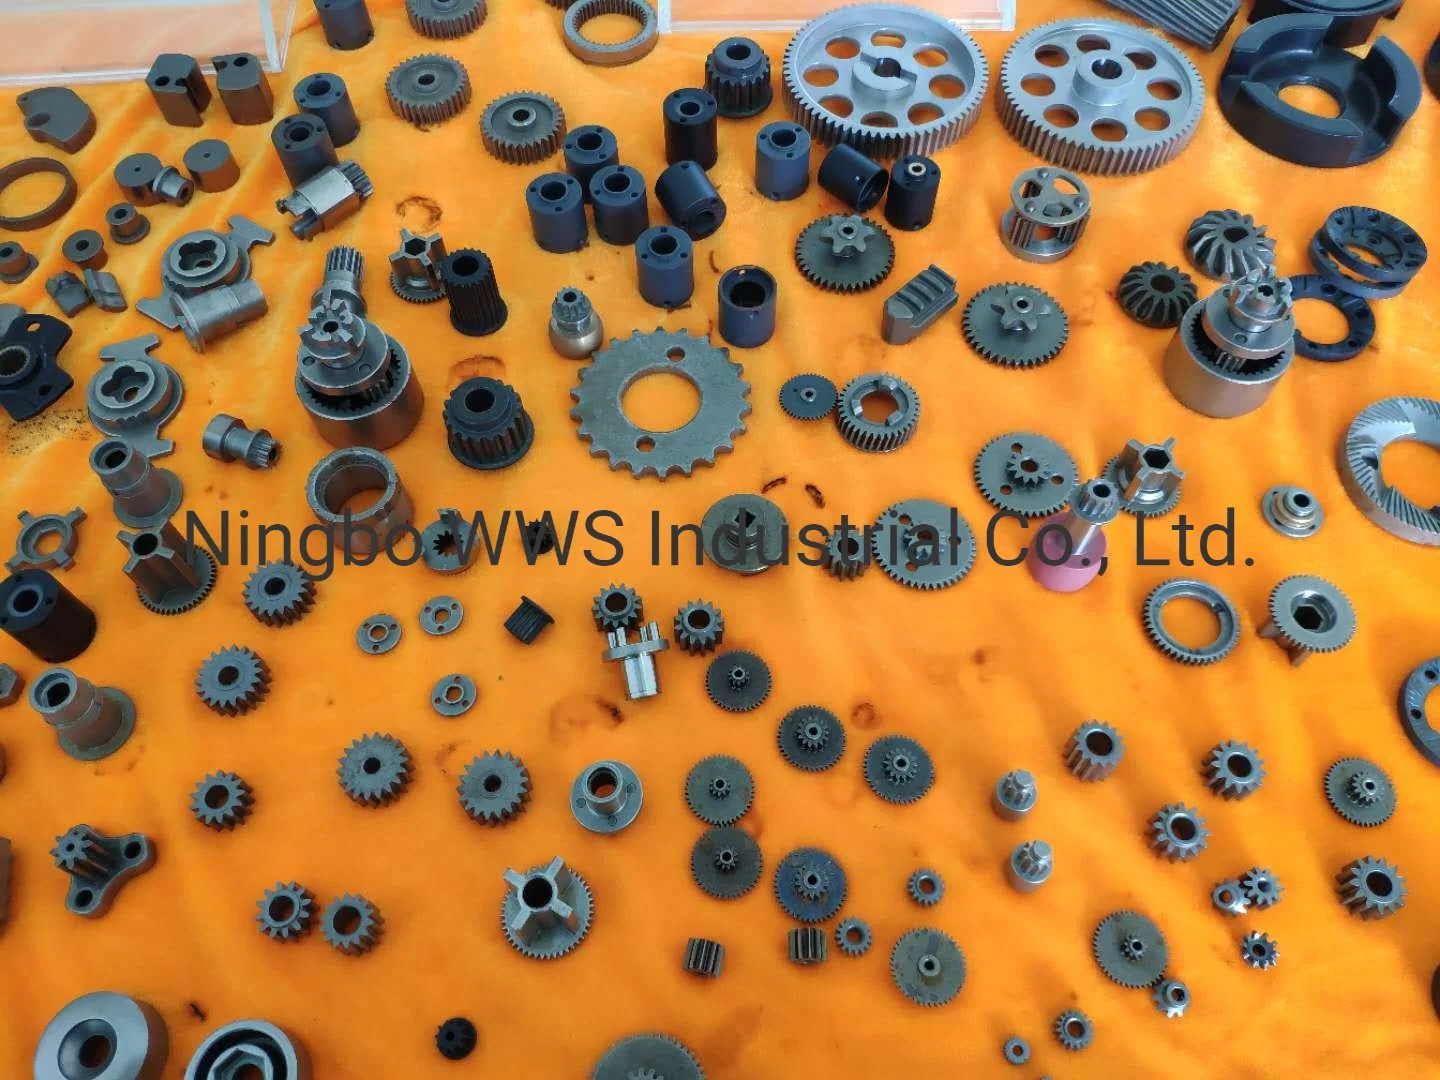 Sewing Machine Parts Metal Injection Molding